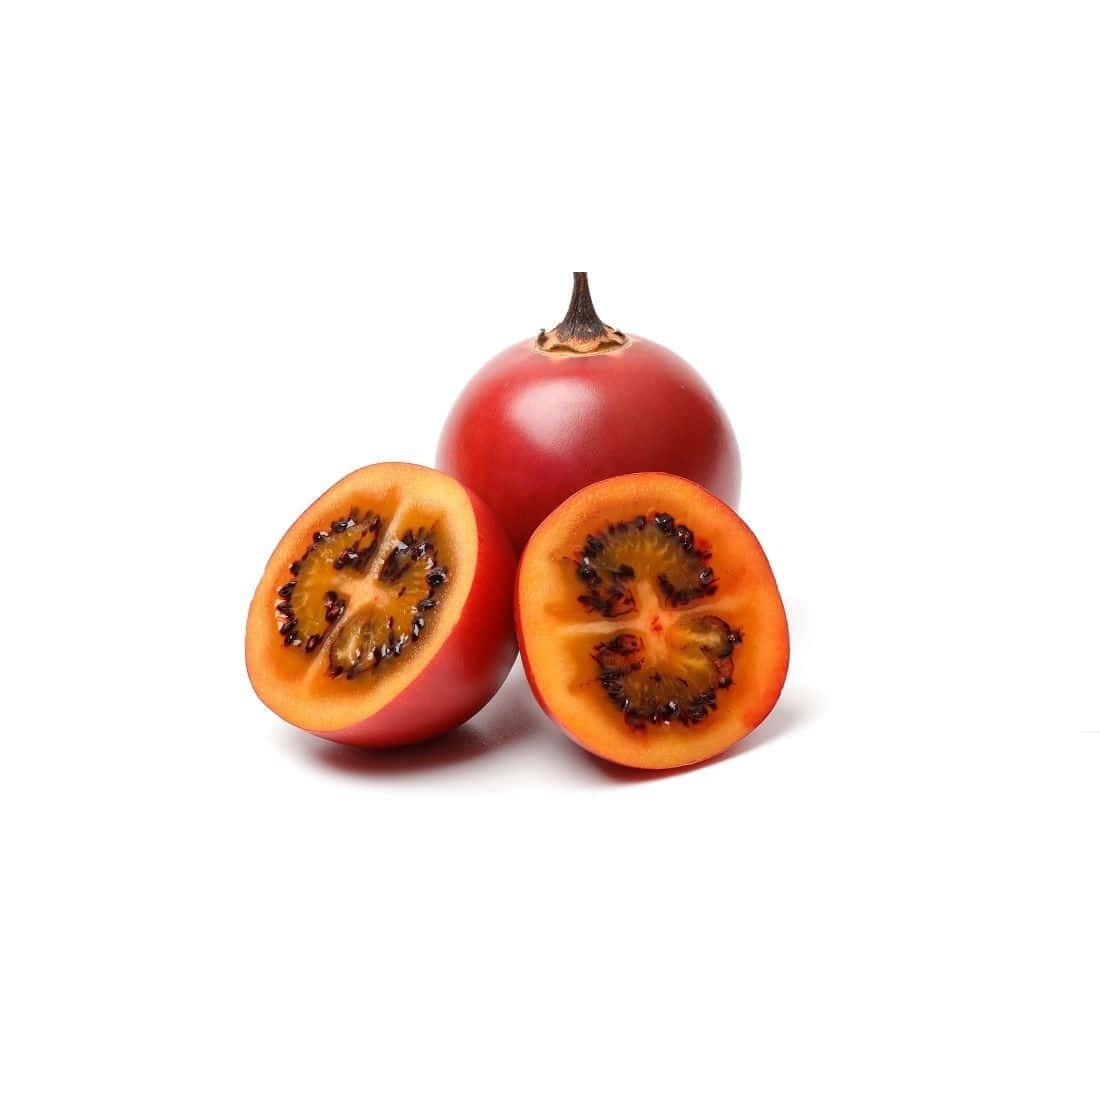 Little Red Tamarillo Fruit With One Sliced In Half Wallpaper